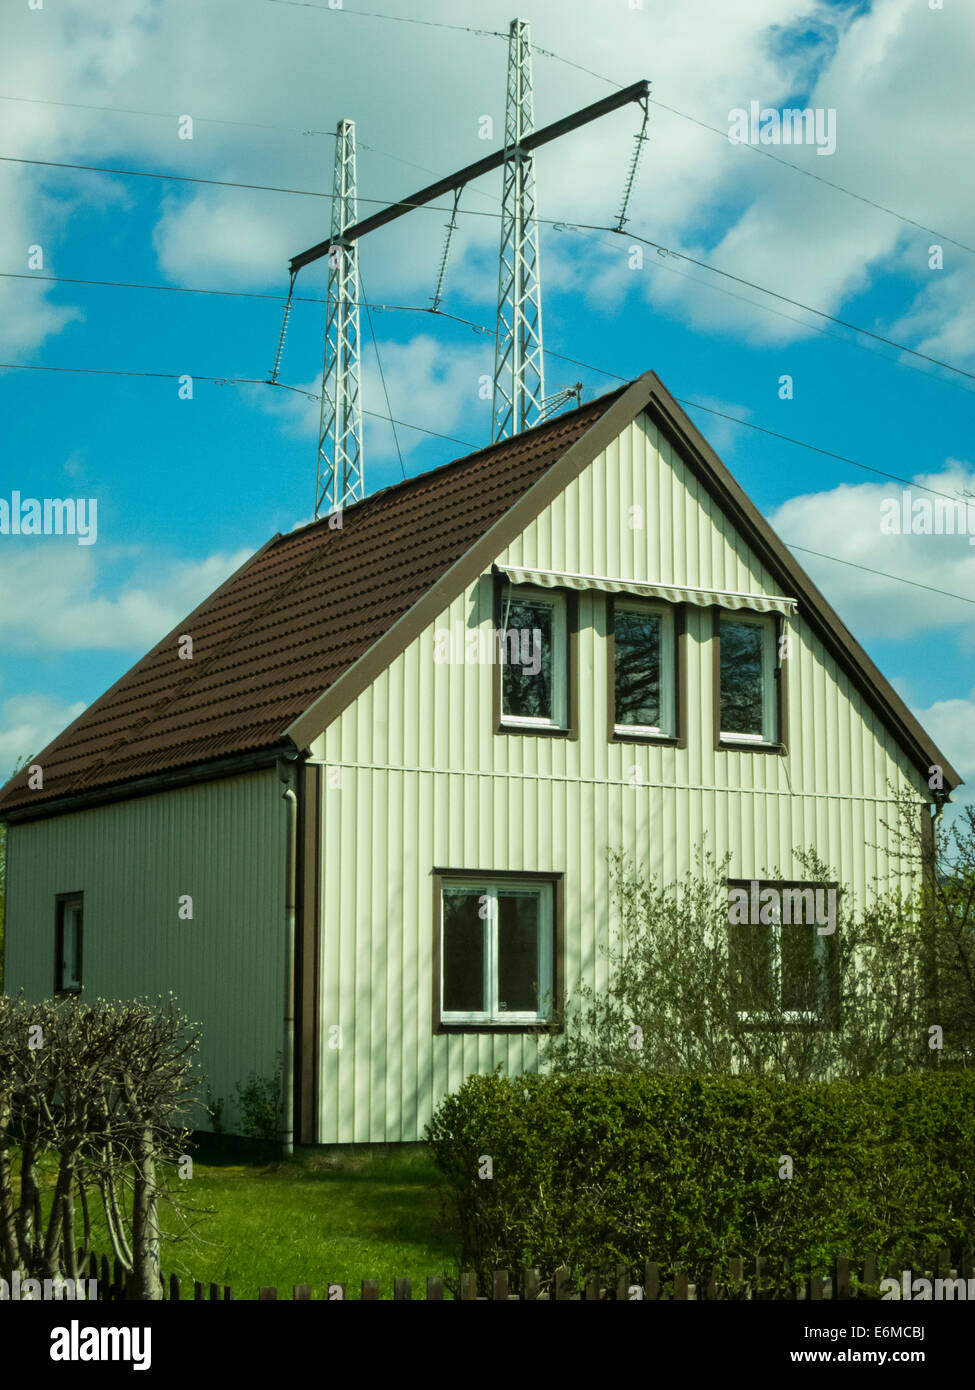 A one-family home next to an overhead power line Stock Photo